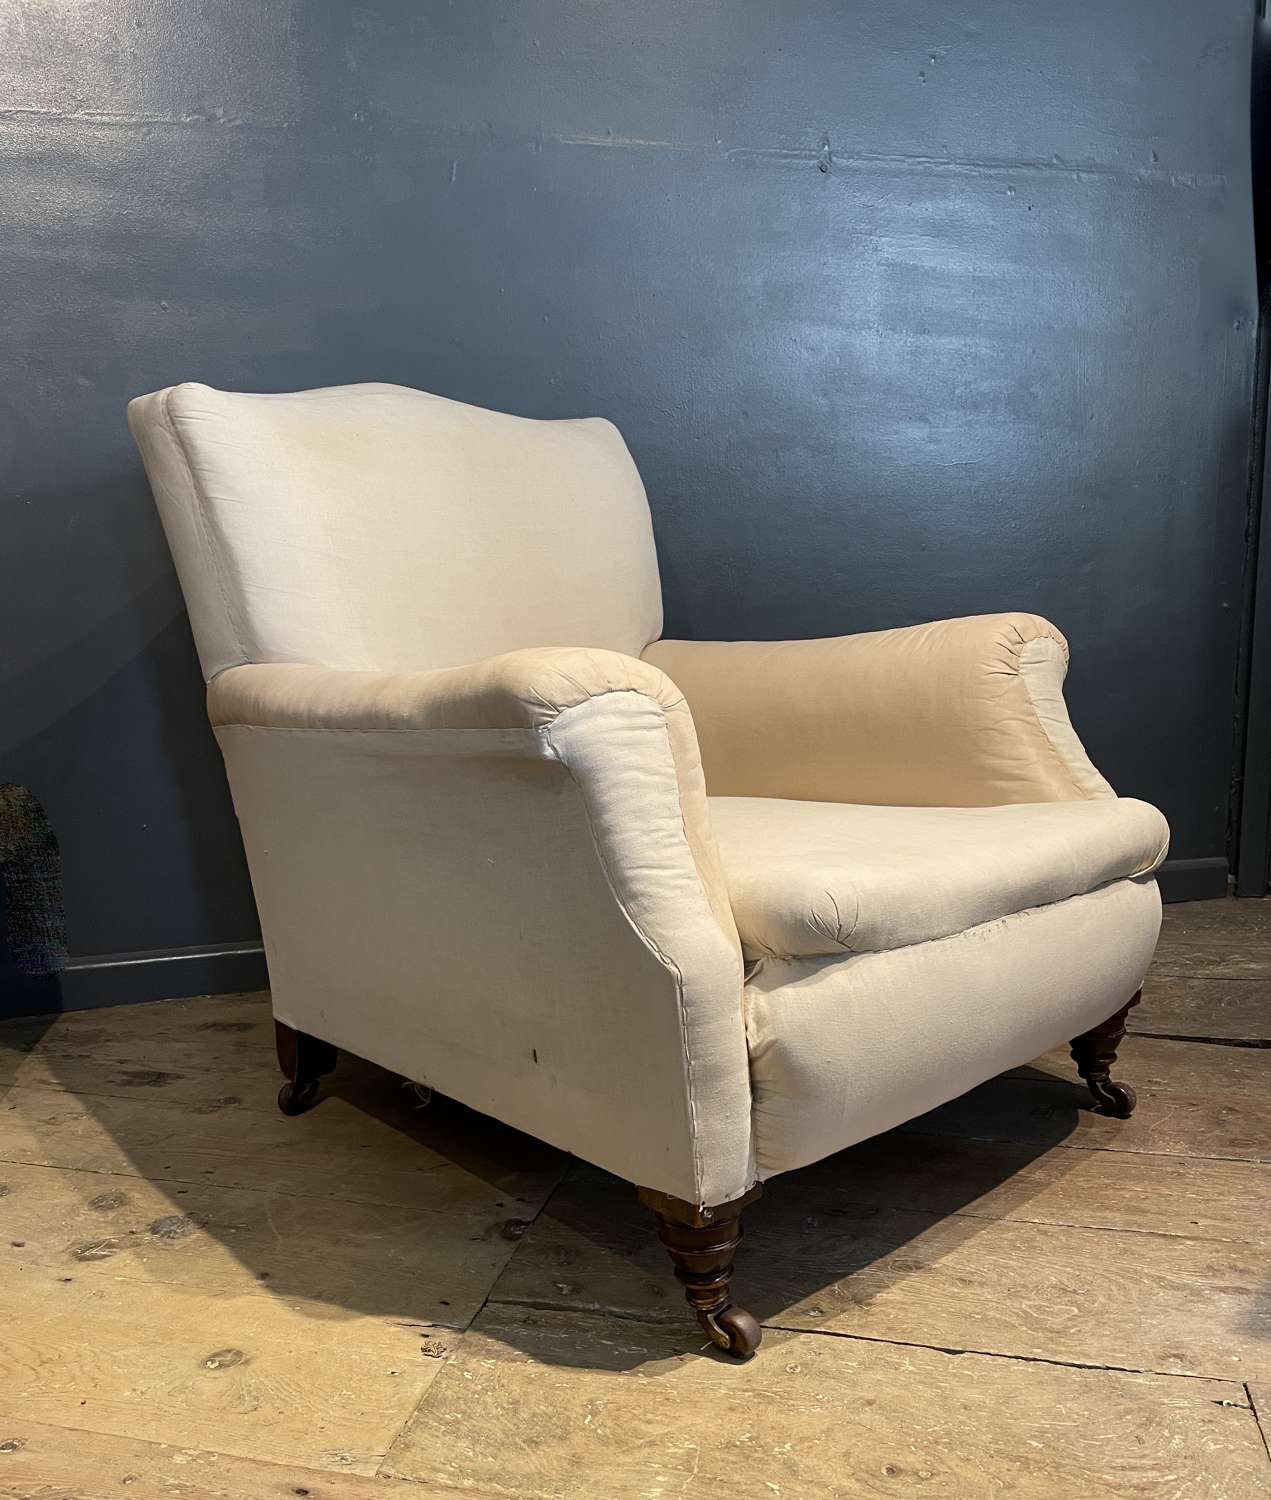 Victorian Library Armchair for Recovering